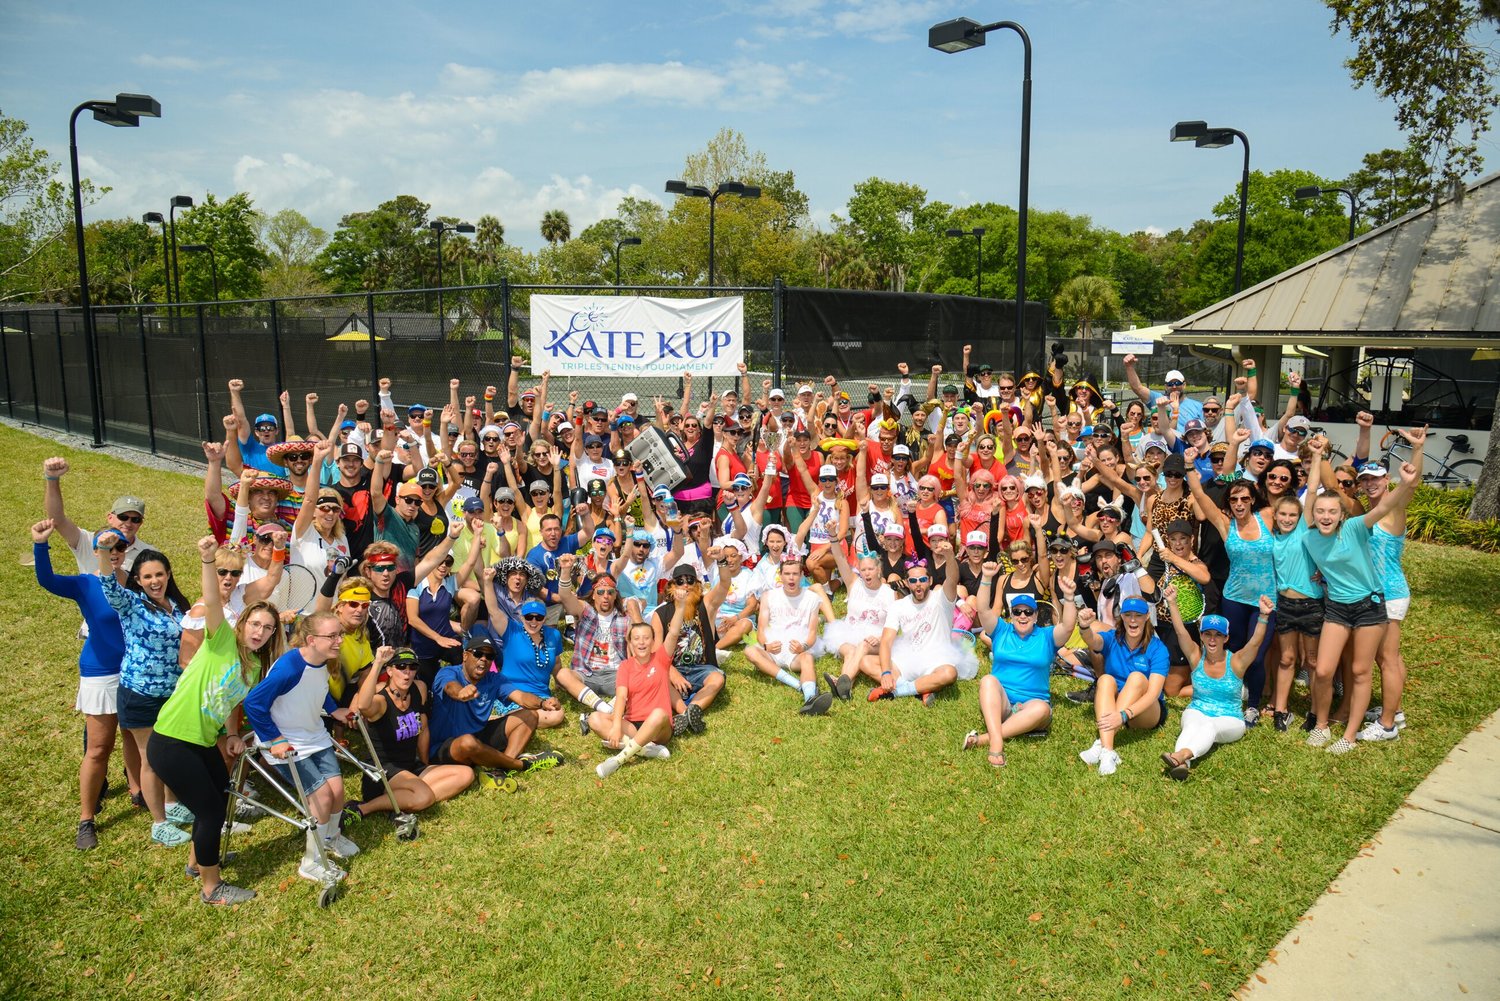 Supporters of the Kate Amato Foundation gather at the KATE KUP Triples Tennis Tournament April 5-6 at the Oak Bridge Club at Sawgrass. The event raised $85,000 for pediatric cancer research.